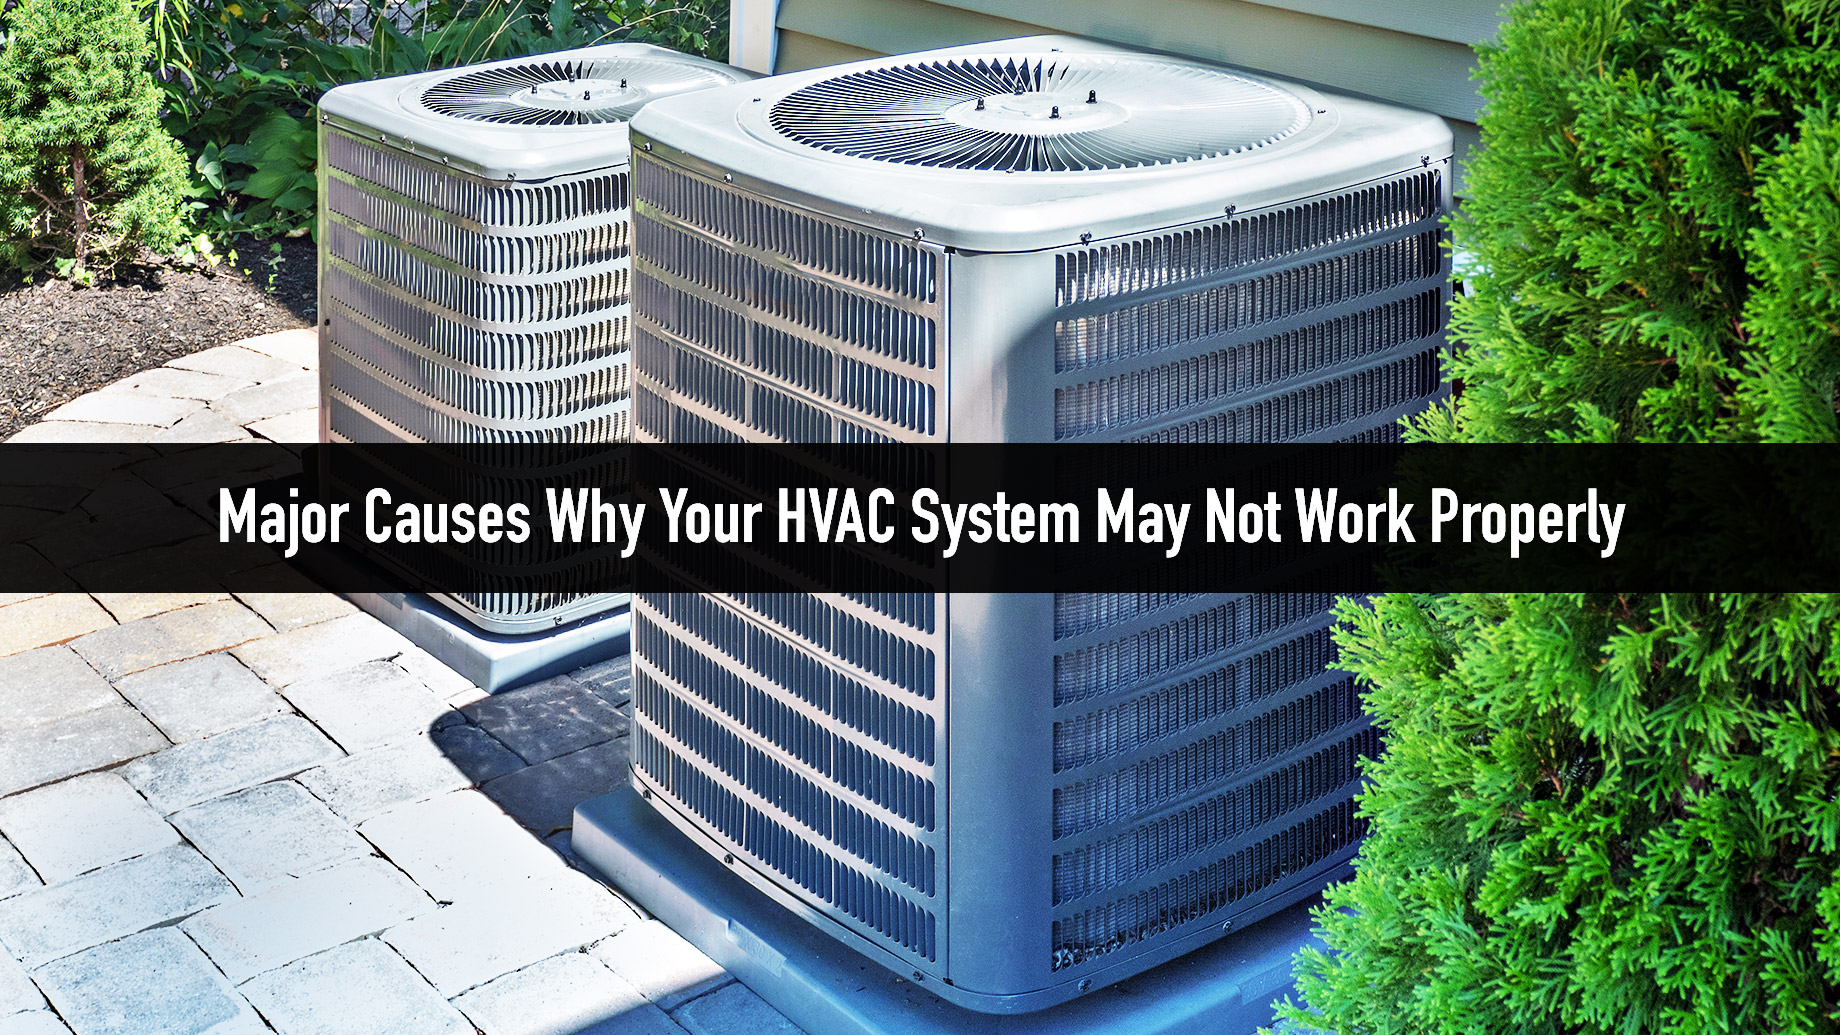 Major Causes Why Your HVAC System May Not Work Properly